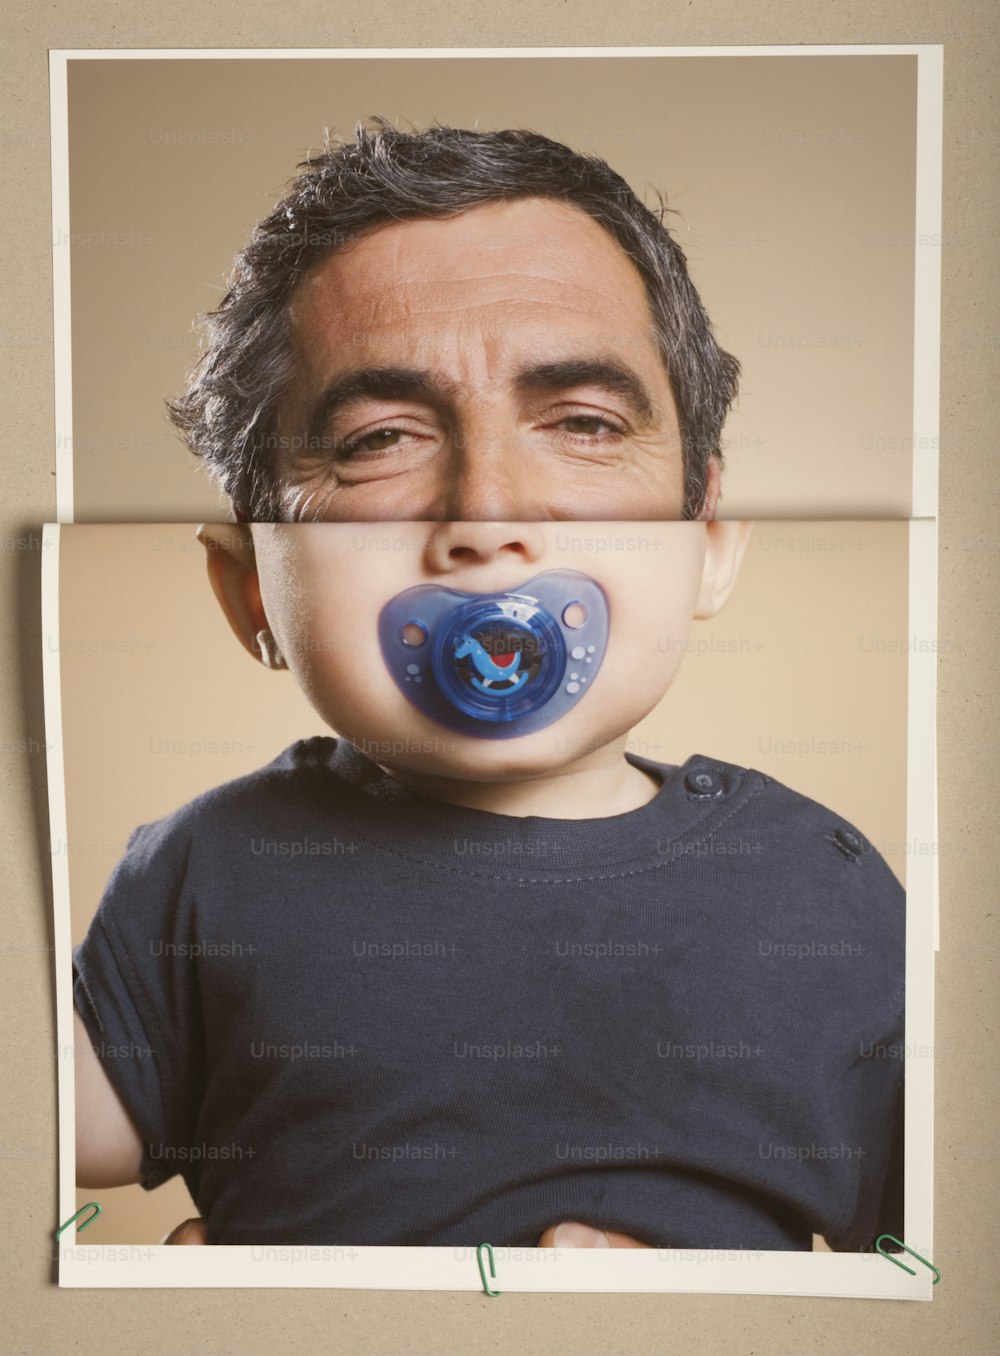 a man with a pacifier in his mouth